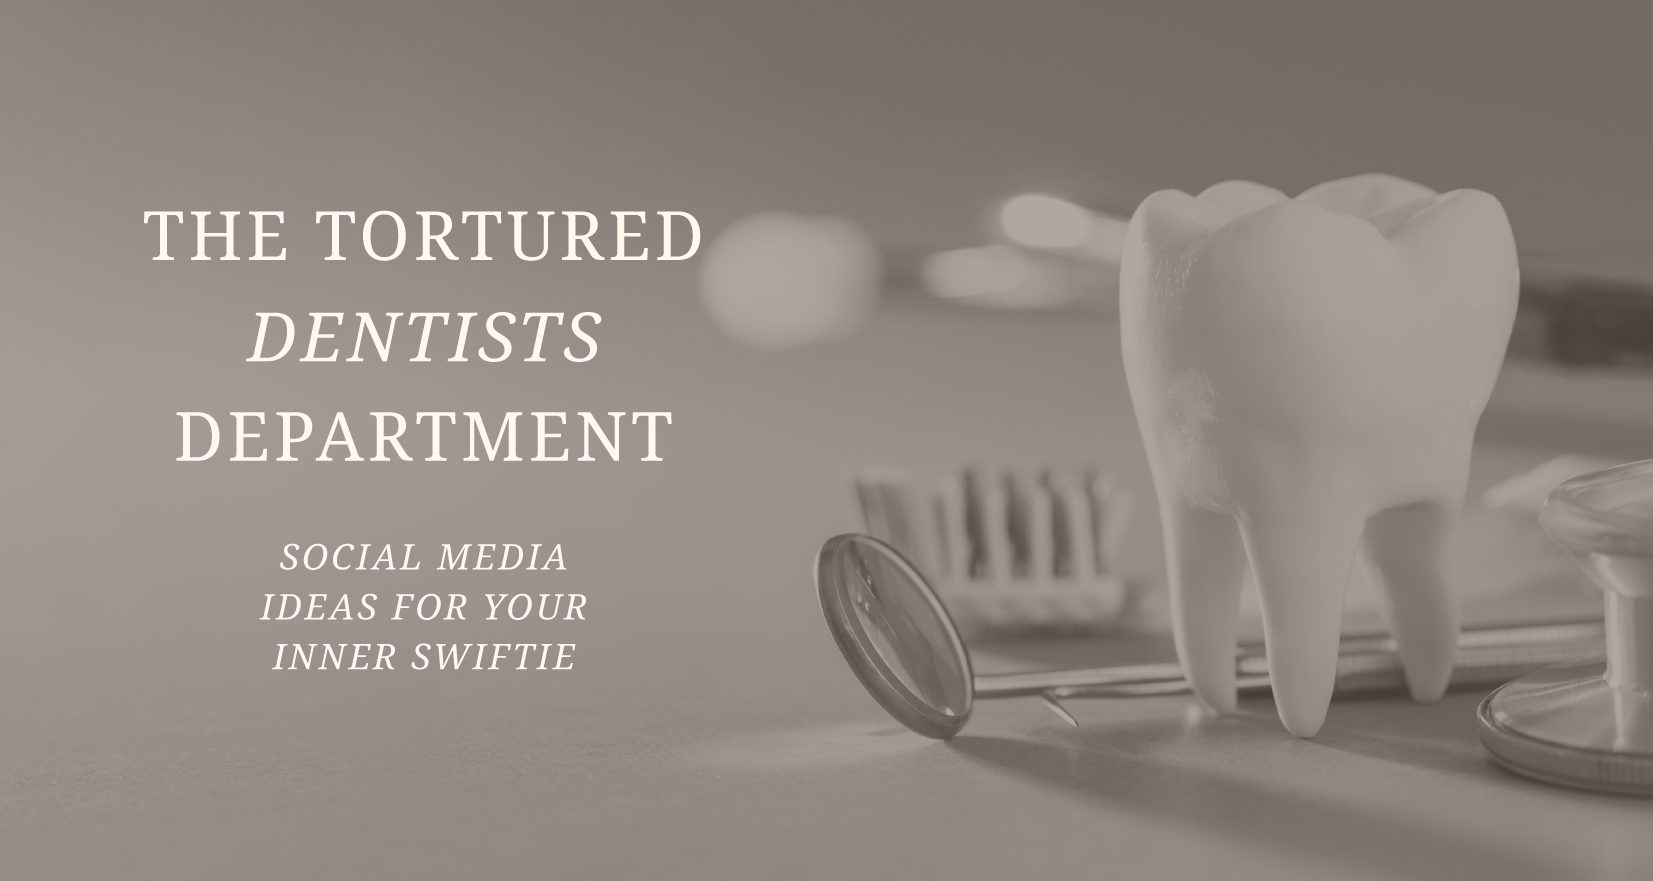 My Social Practice - Social Media Marketing for Dental & Dental Specialty Practices - oral surgeon reputation management